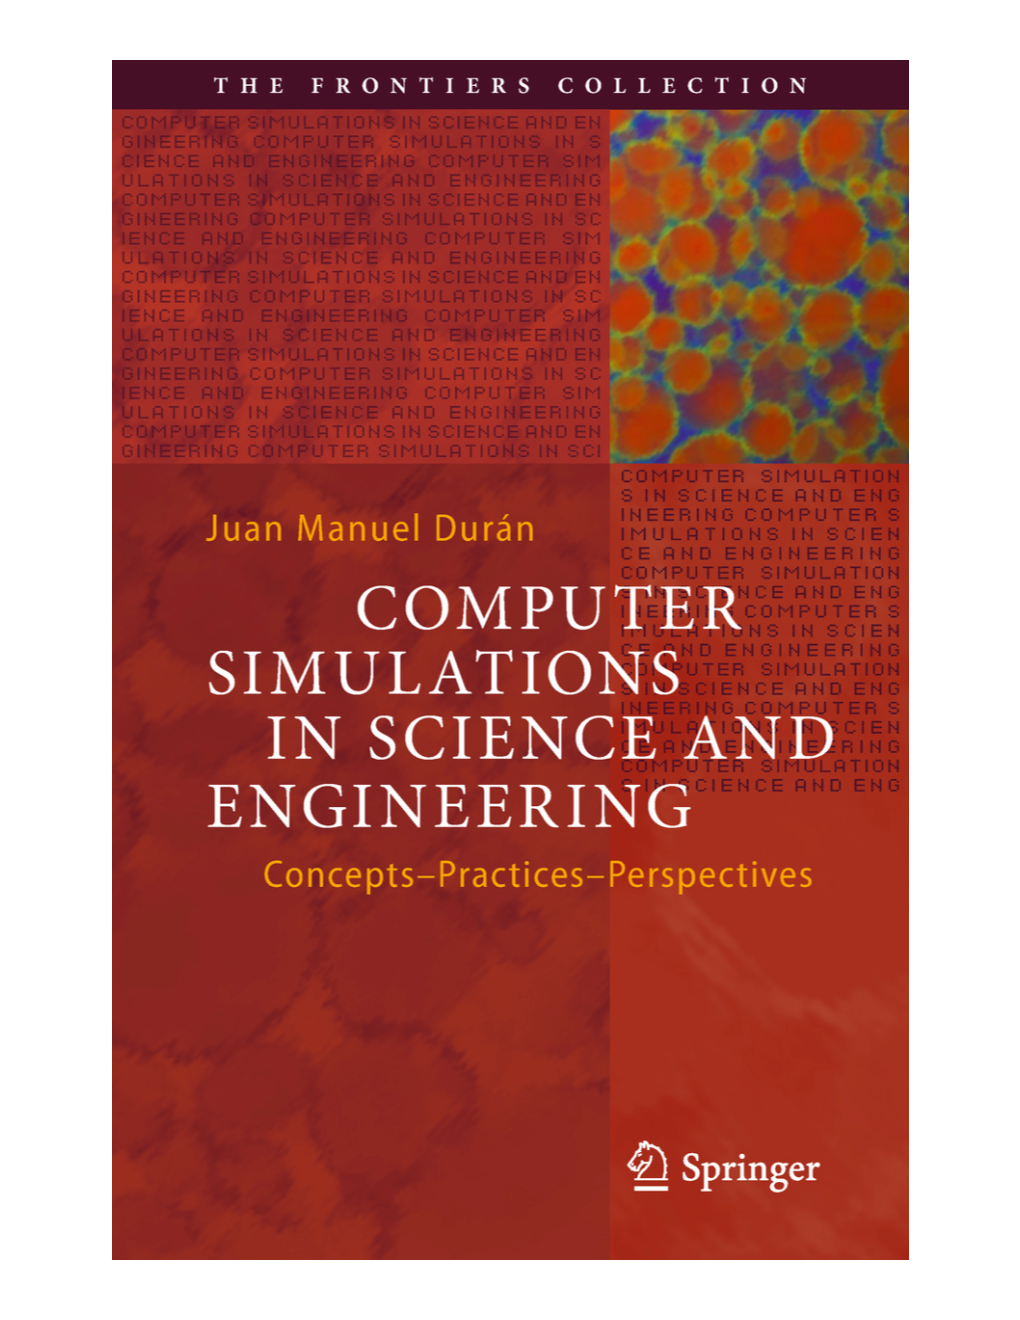 Computer Simulations in Science and Engineering. Concept, Practices, Perspectives